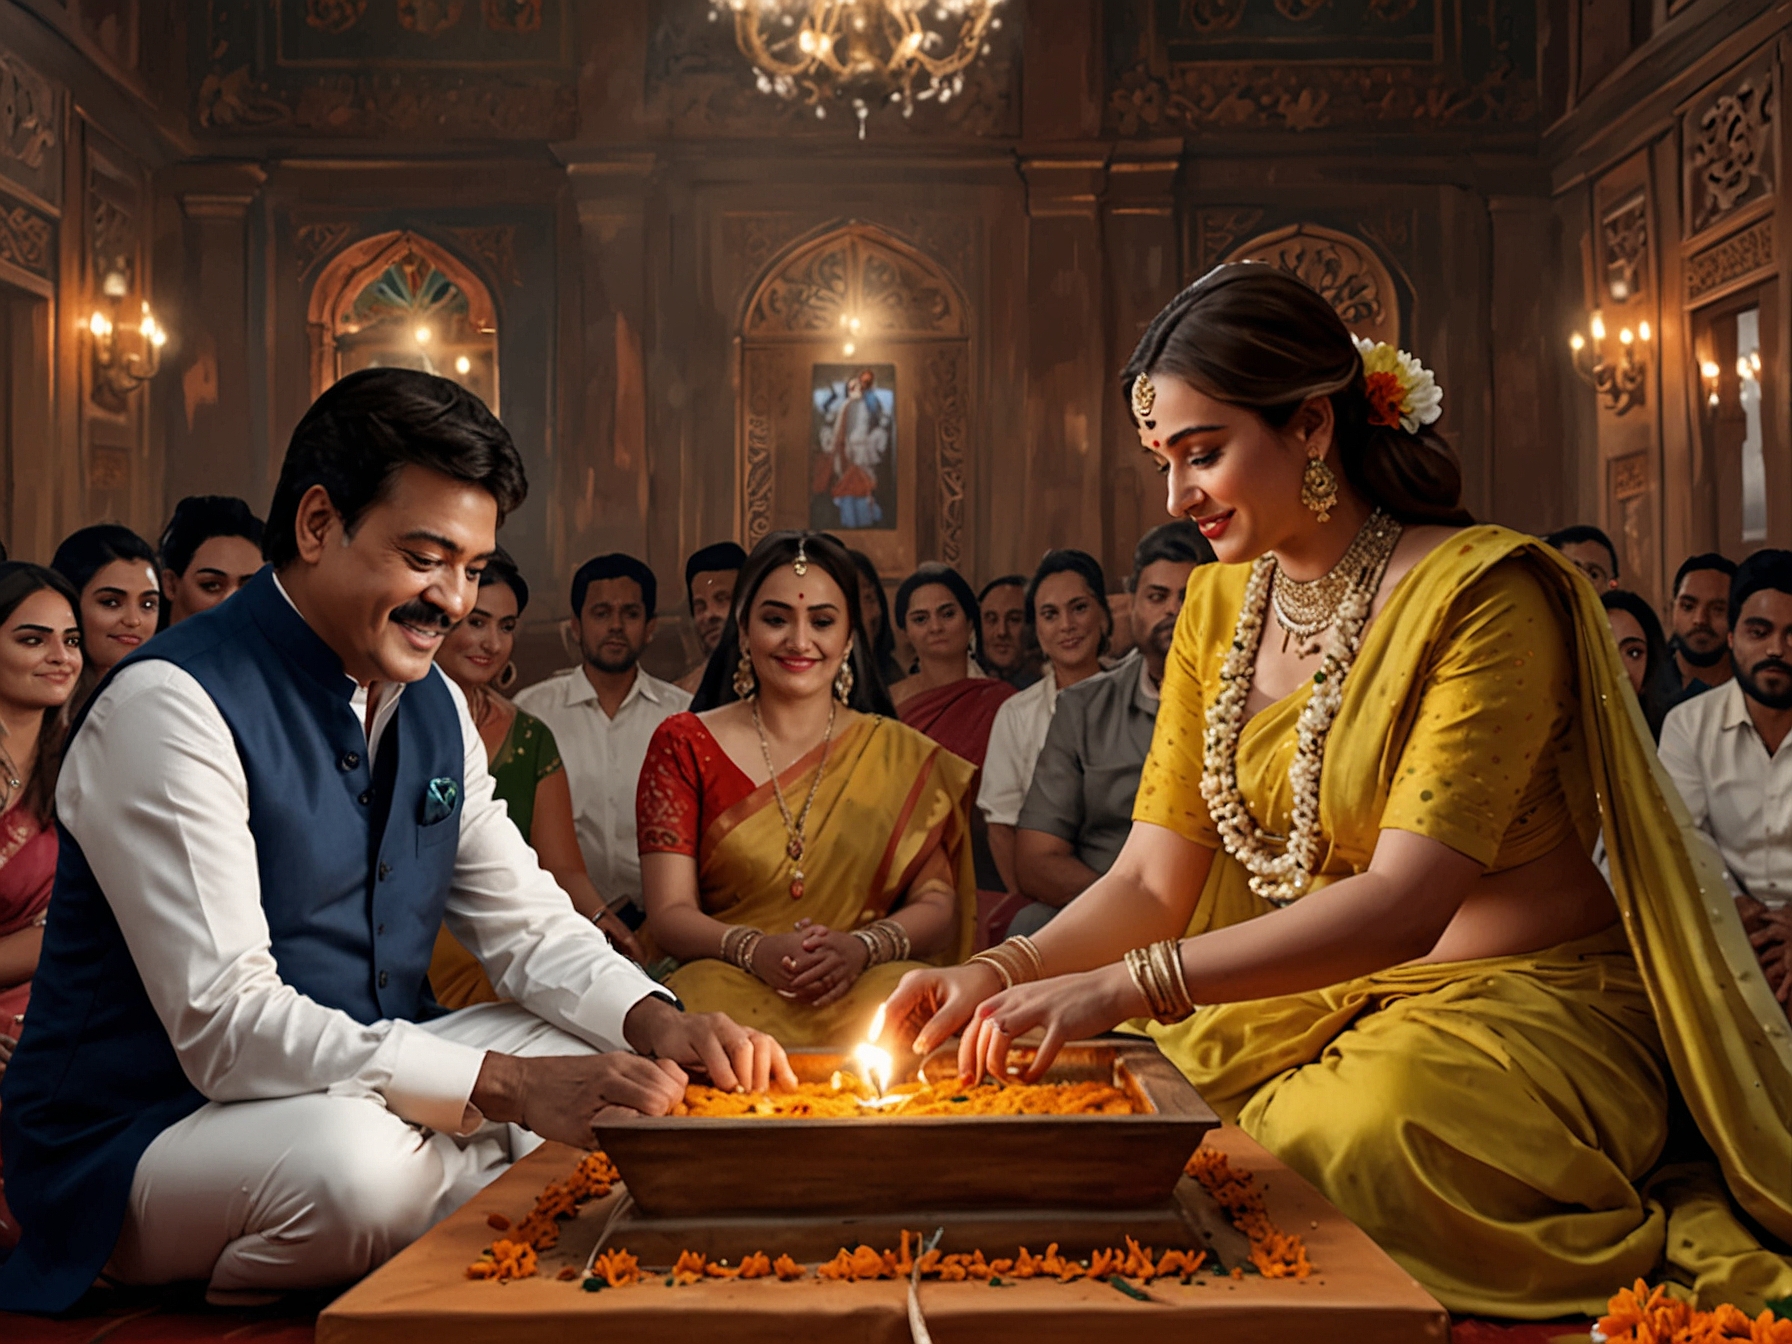 Shatrughan Sinha performing a Hindu ritual with Sonakshi Sinha and Zaheer Iqbal sitting together, highlighting the beautiful blend of traditions at their inter-faith wedding.